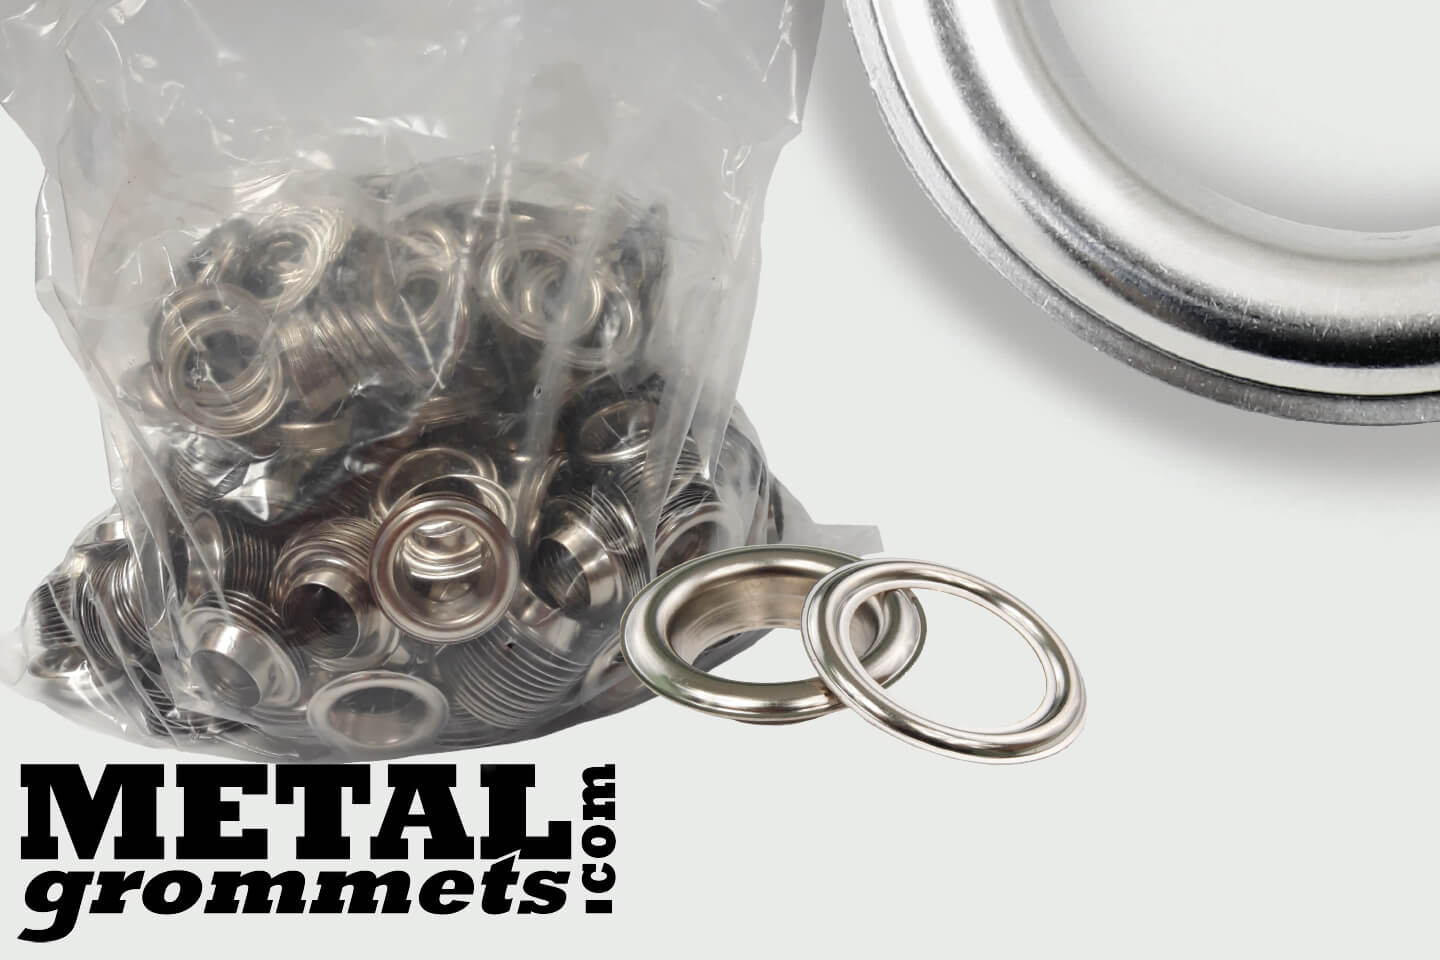 #5.5 (11/16 - 0.6875 Hole Size) Nickel Plated Grommets & Washers